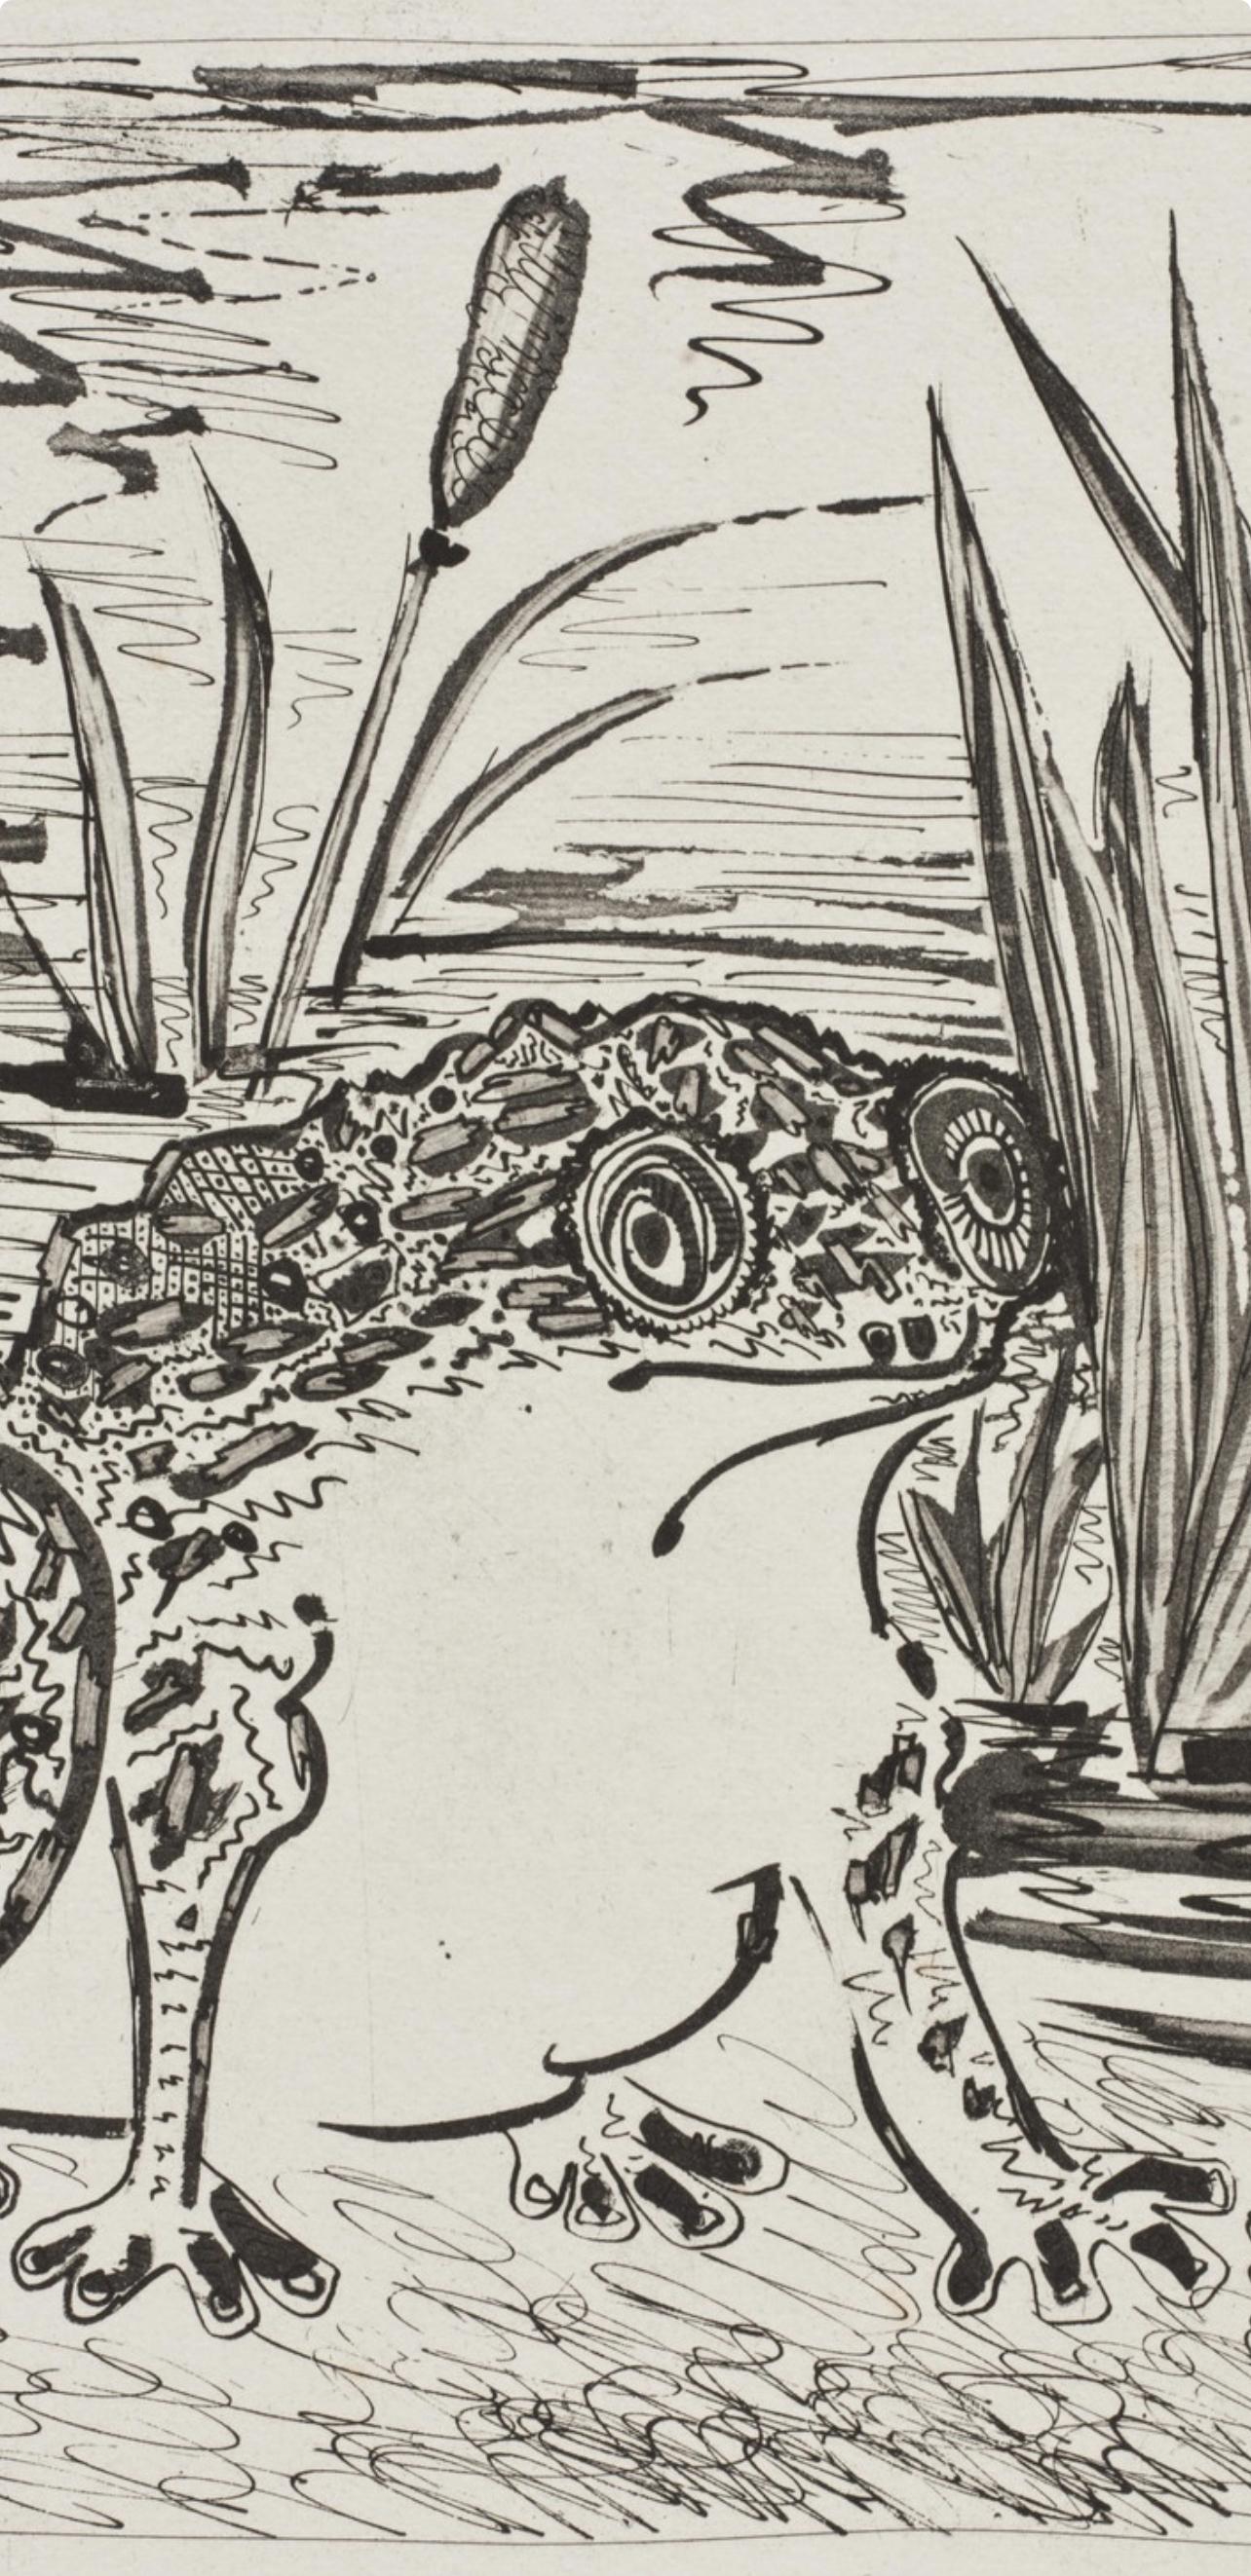 Picasso, Le Crapaud, Histoire naturelle (after) - Modern Print by Pablo Picasso